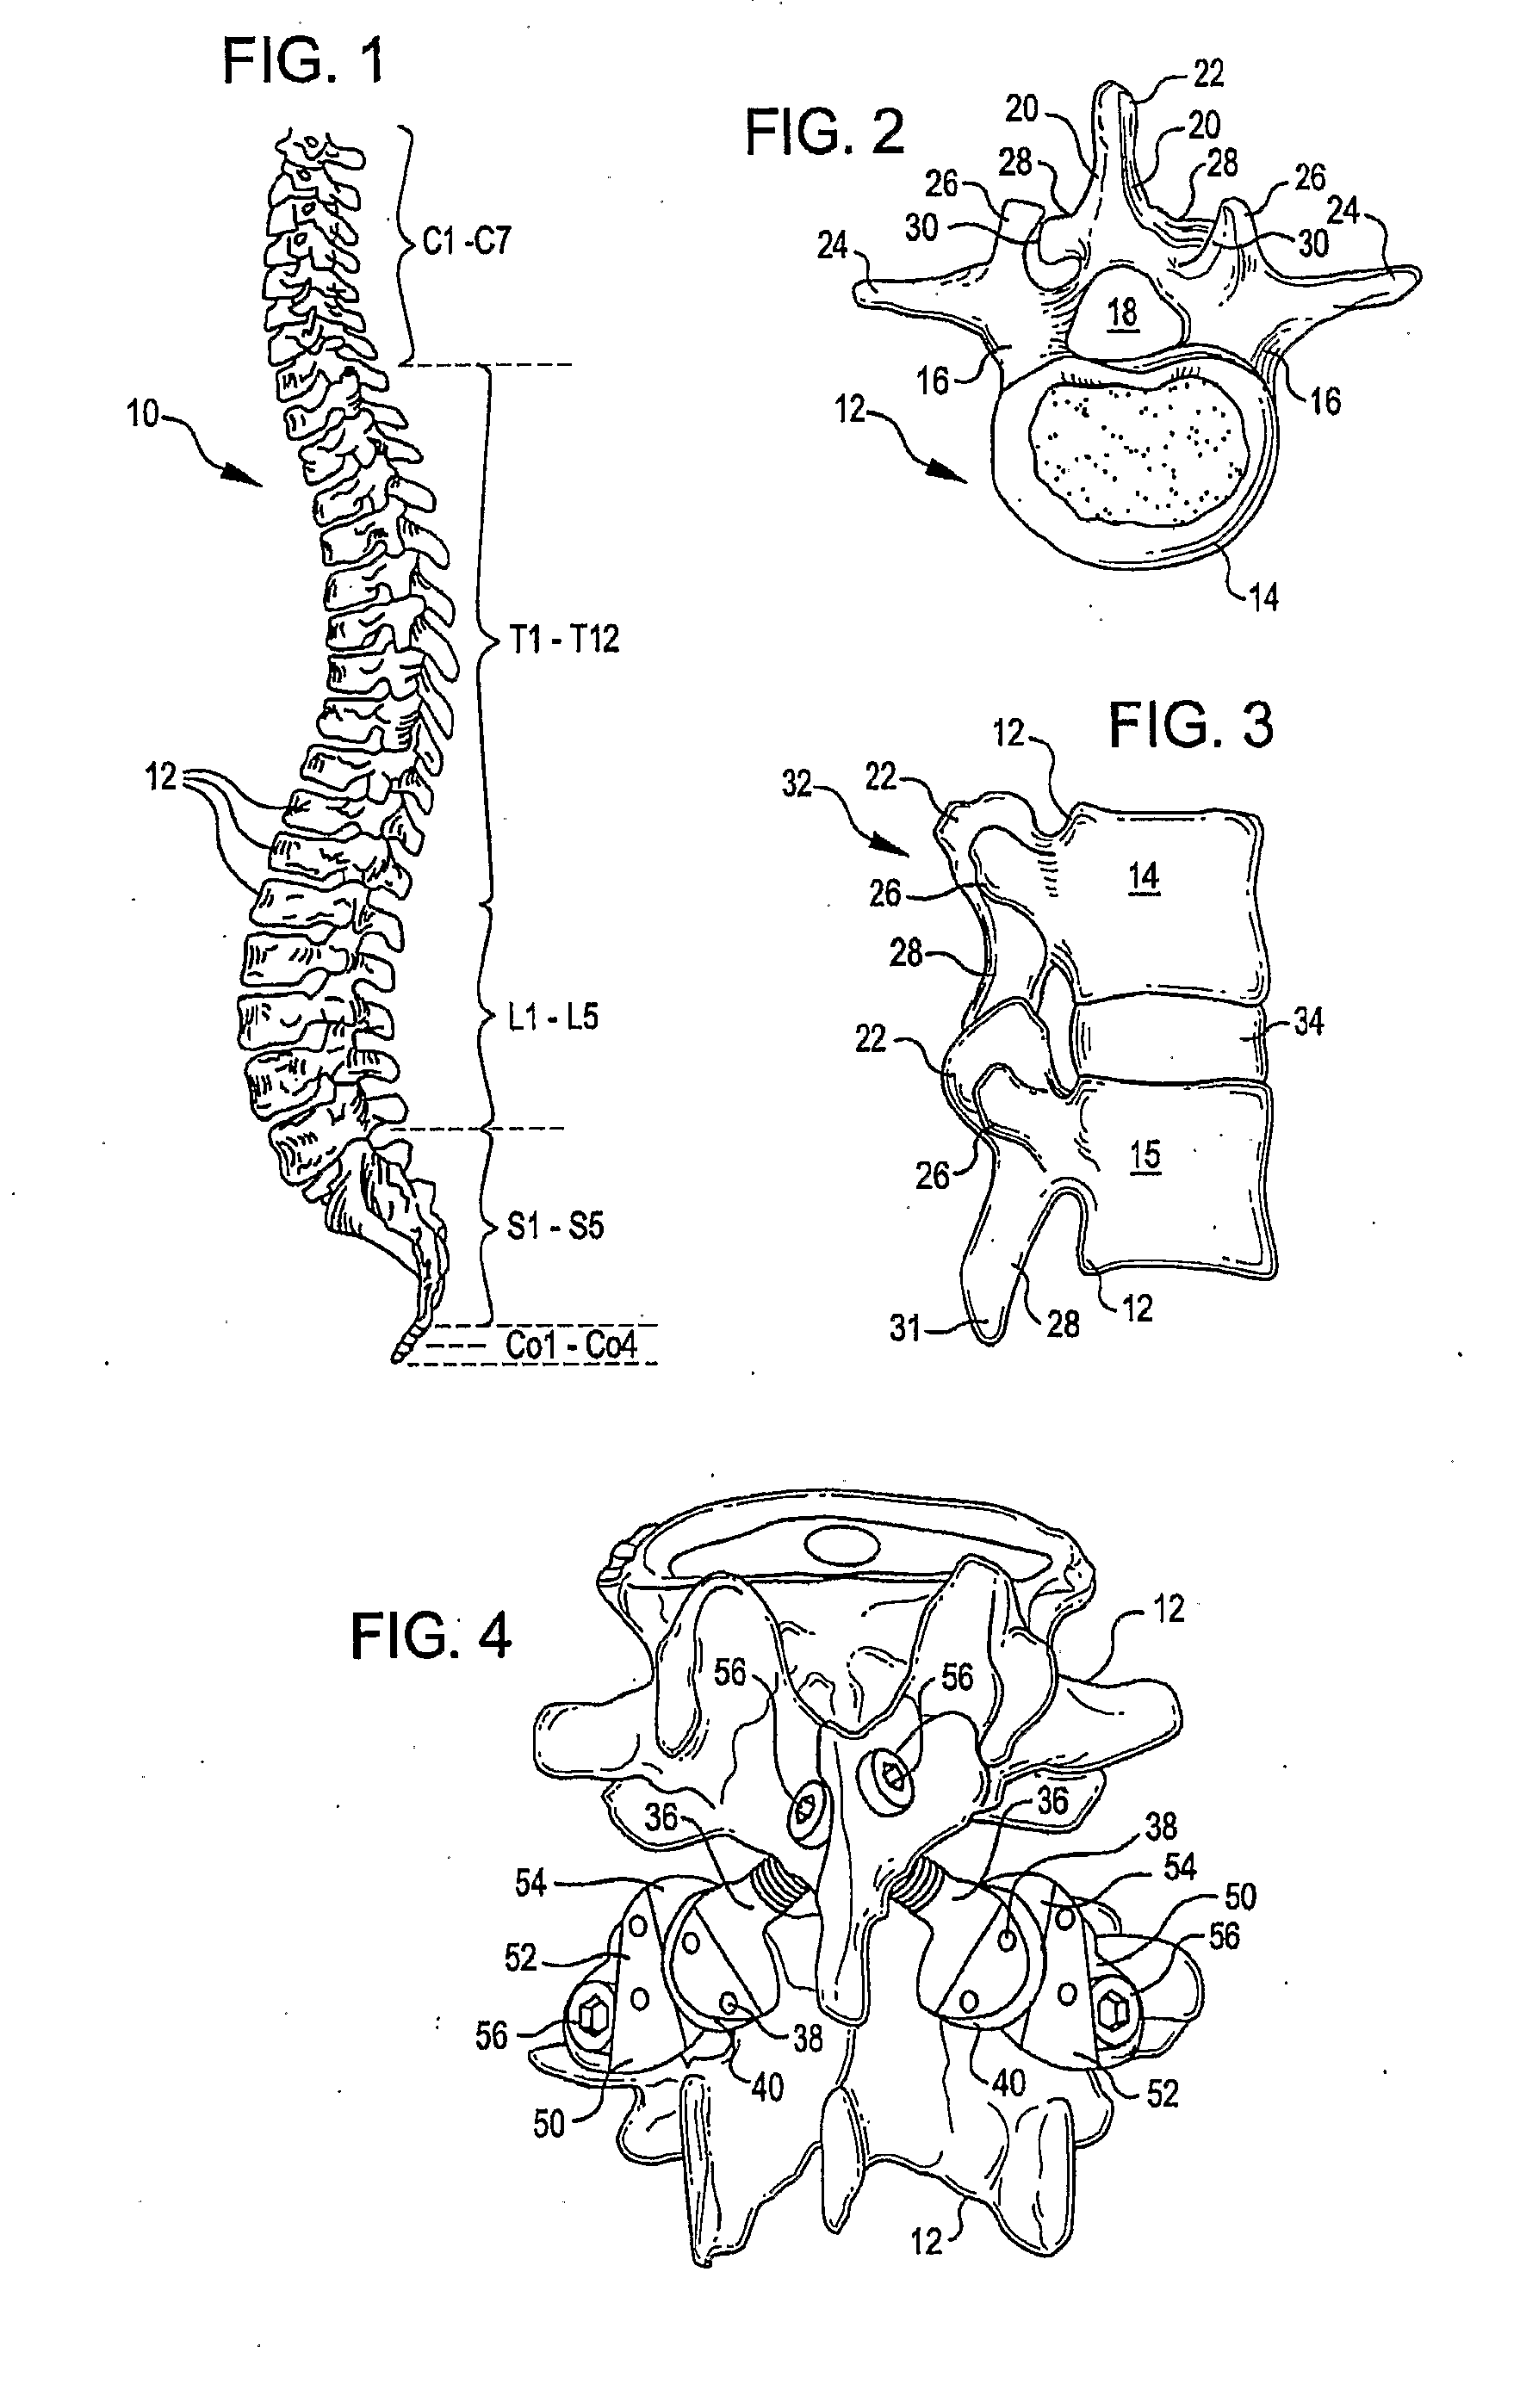 Crossbar Spinal Prosthesis Having a Modular Design and Systems for Treating Spinal Pathologies